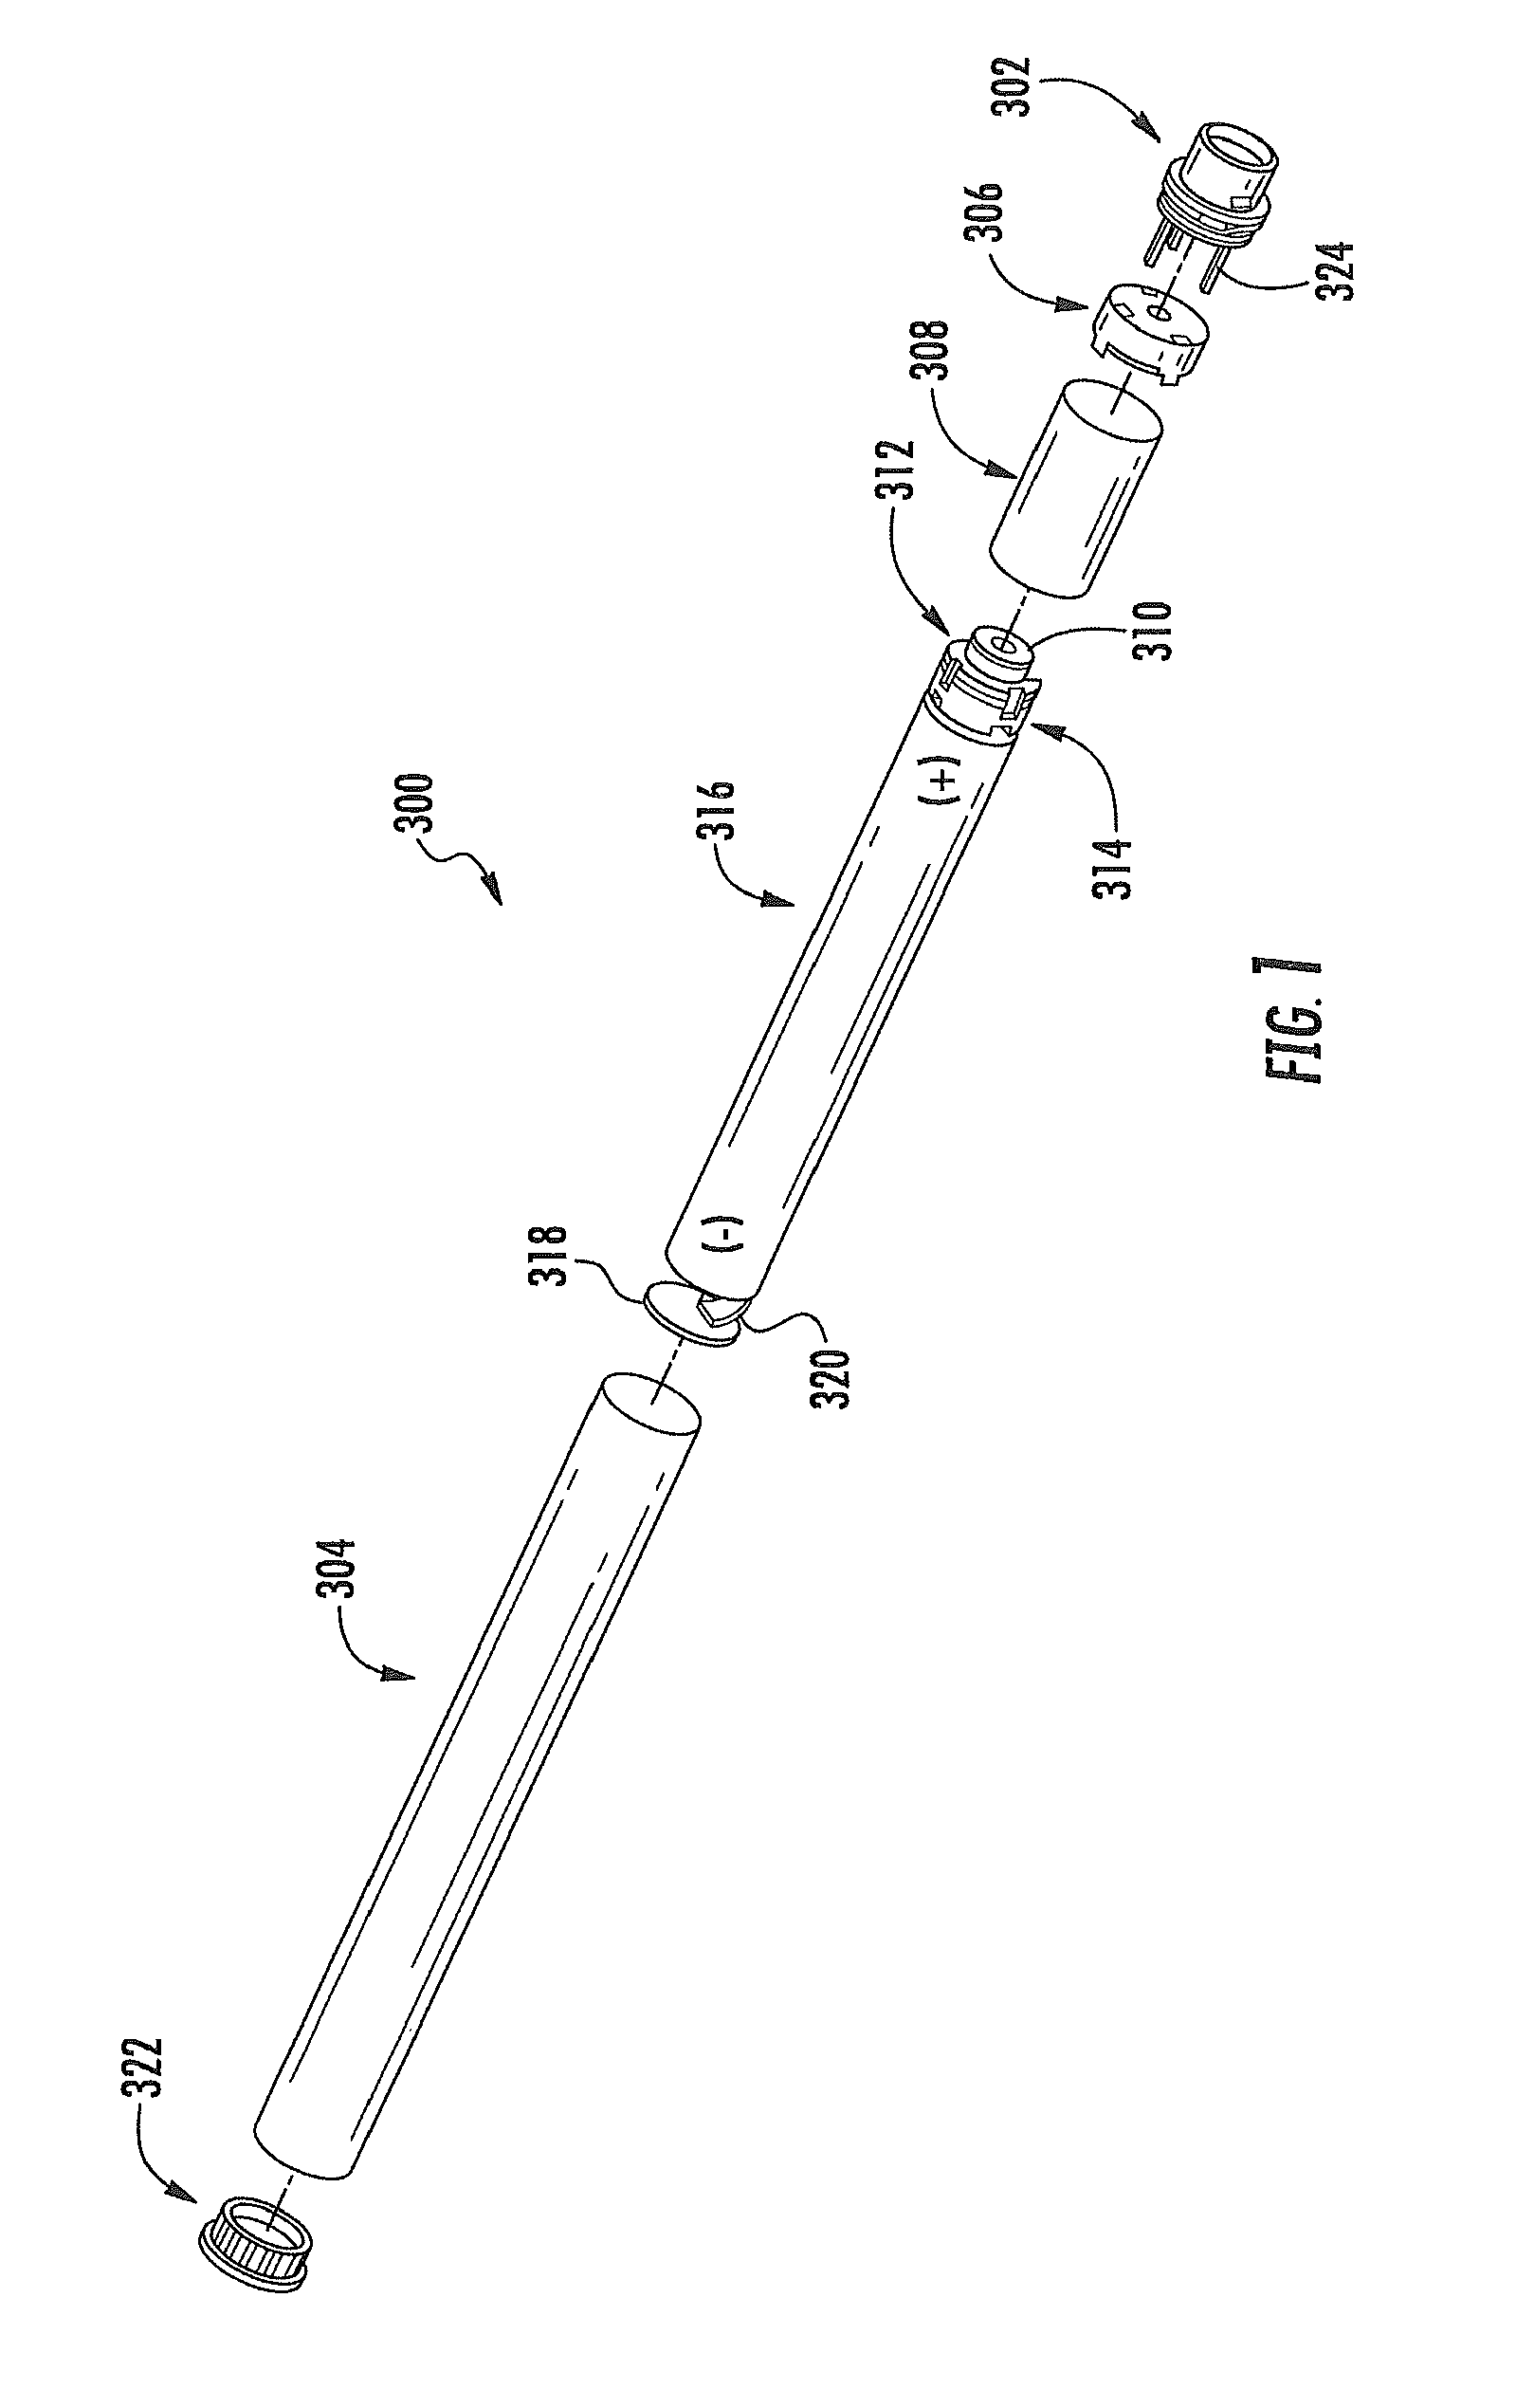 Aerosol Delivery Device Including a Positive Displacement Aerosol Delivery Mechanism